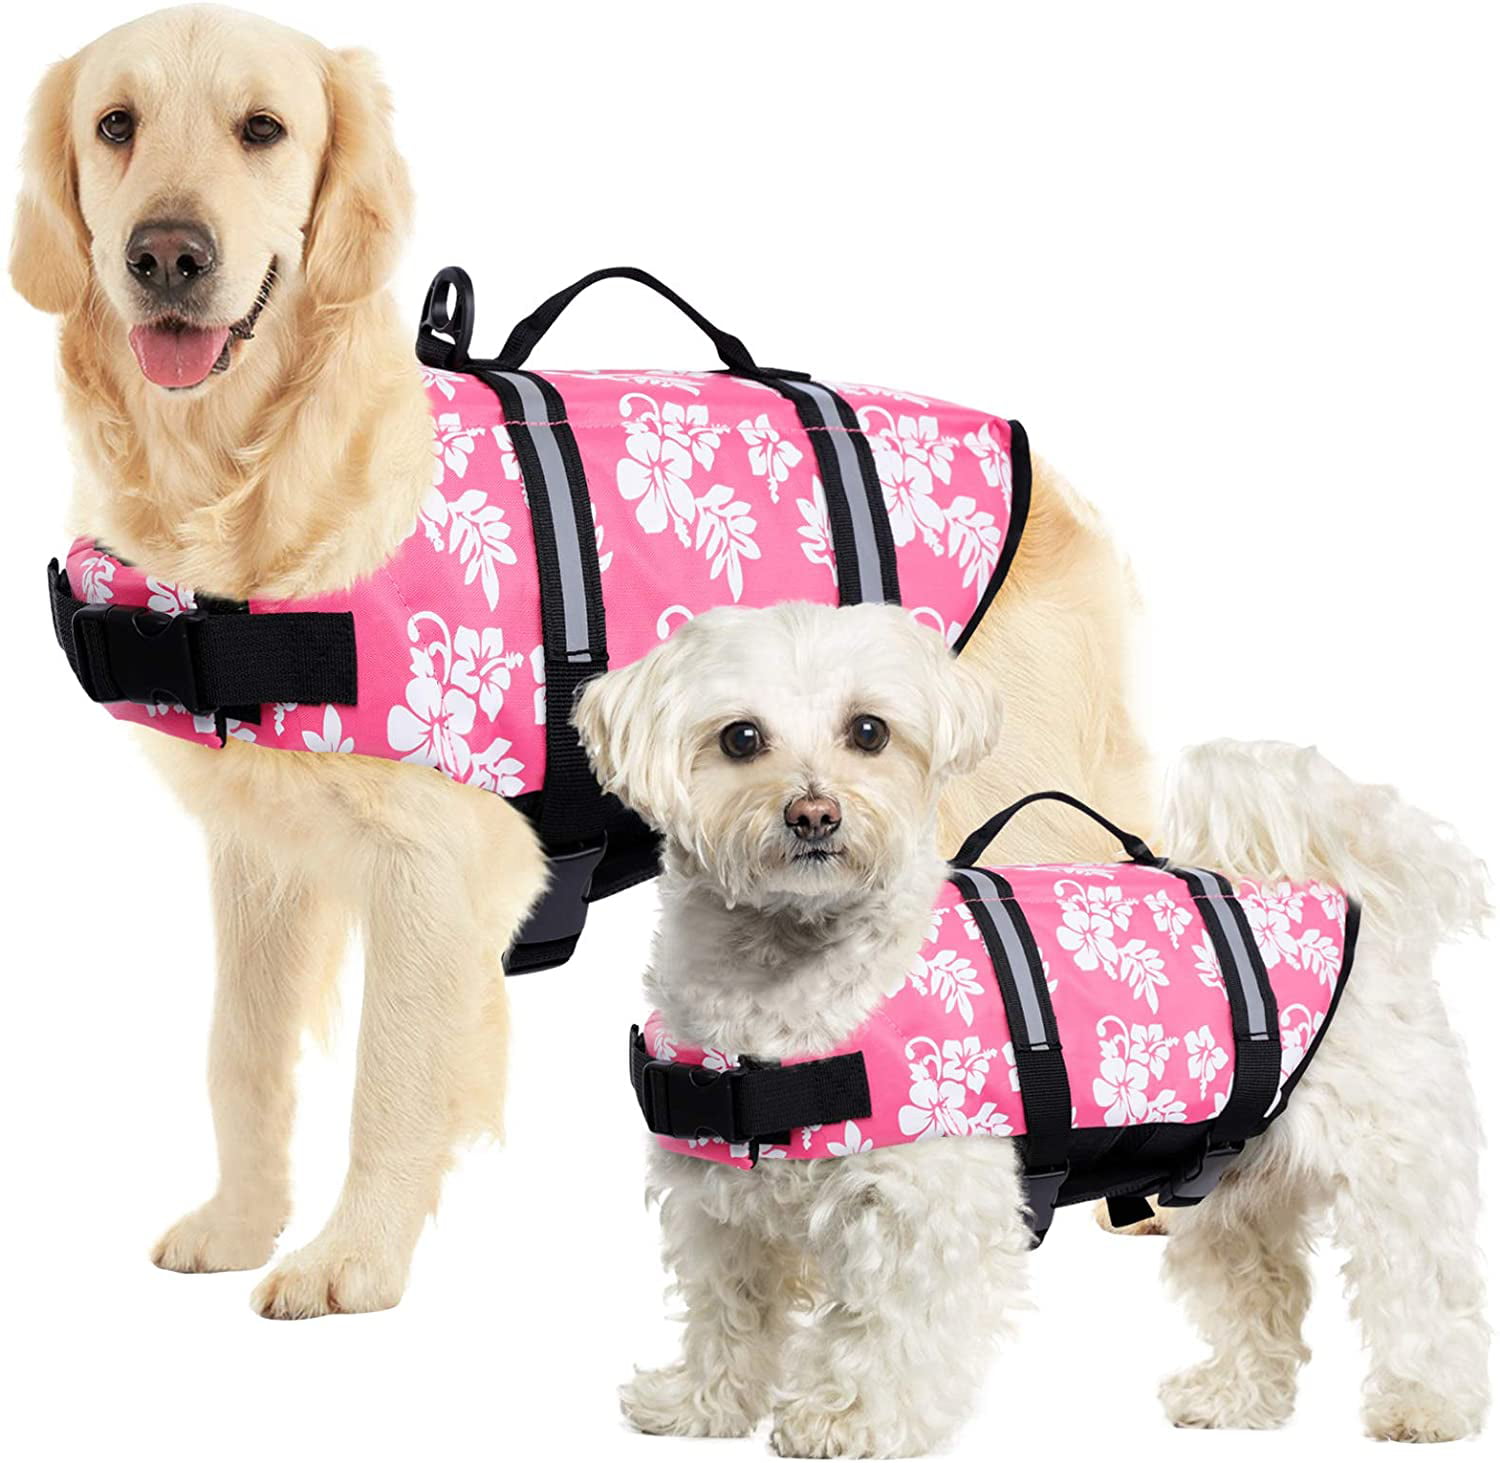 PinkFlower, XS Safety Pet Flotation Life Vest with Reflective Stripes and Rescue Handle SUNFURA Ripstop Dog Life Jacket Adjustable Puppy Lifesaver Swimsuit Preserver for Small Medium Large Dogs 